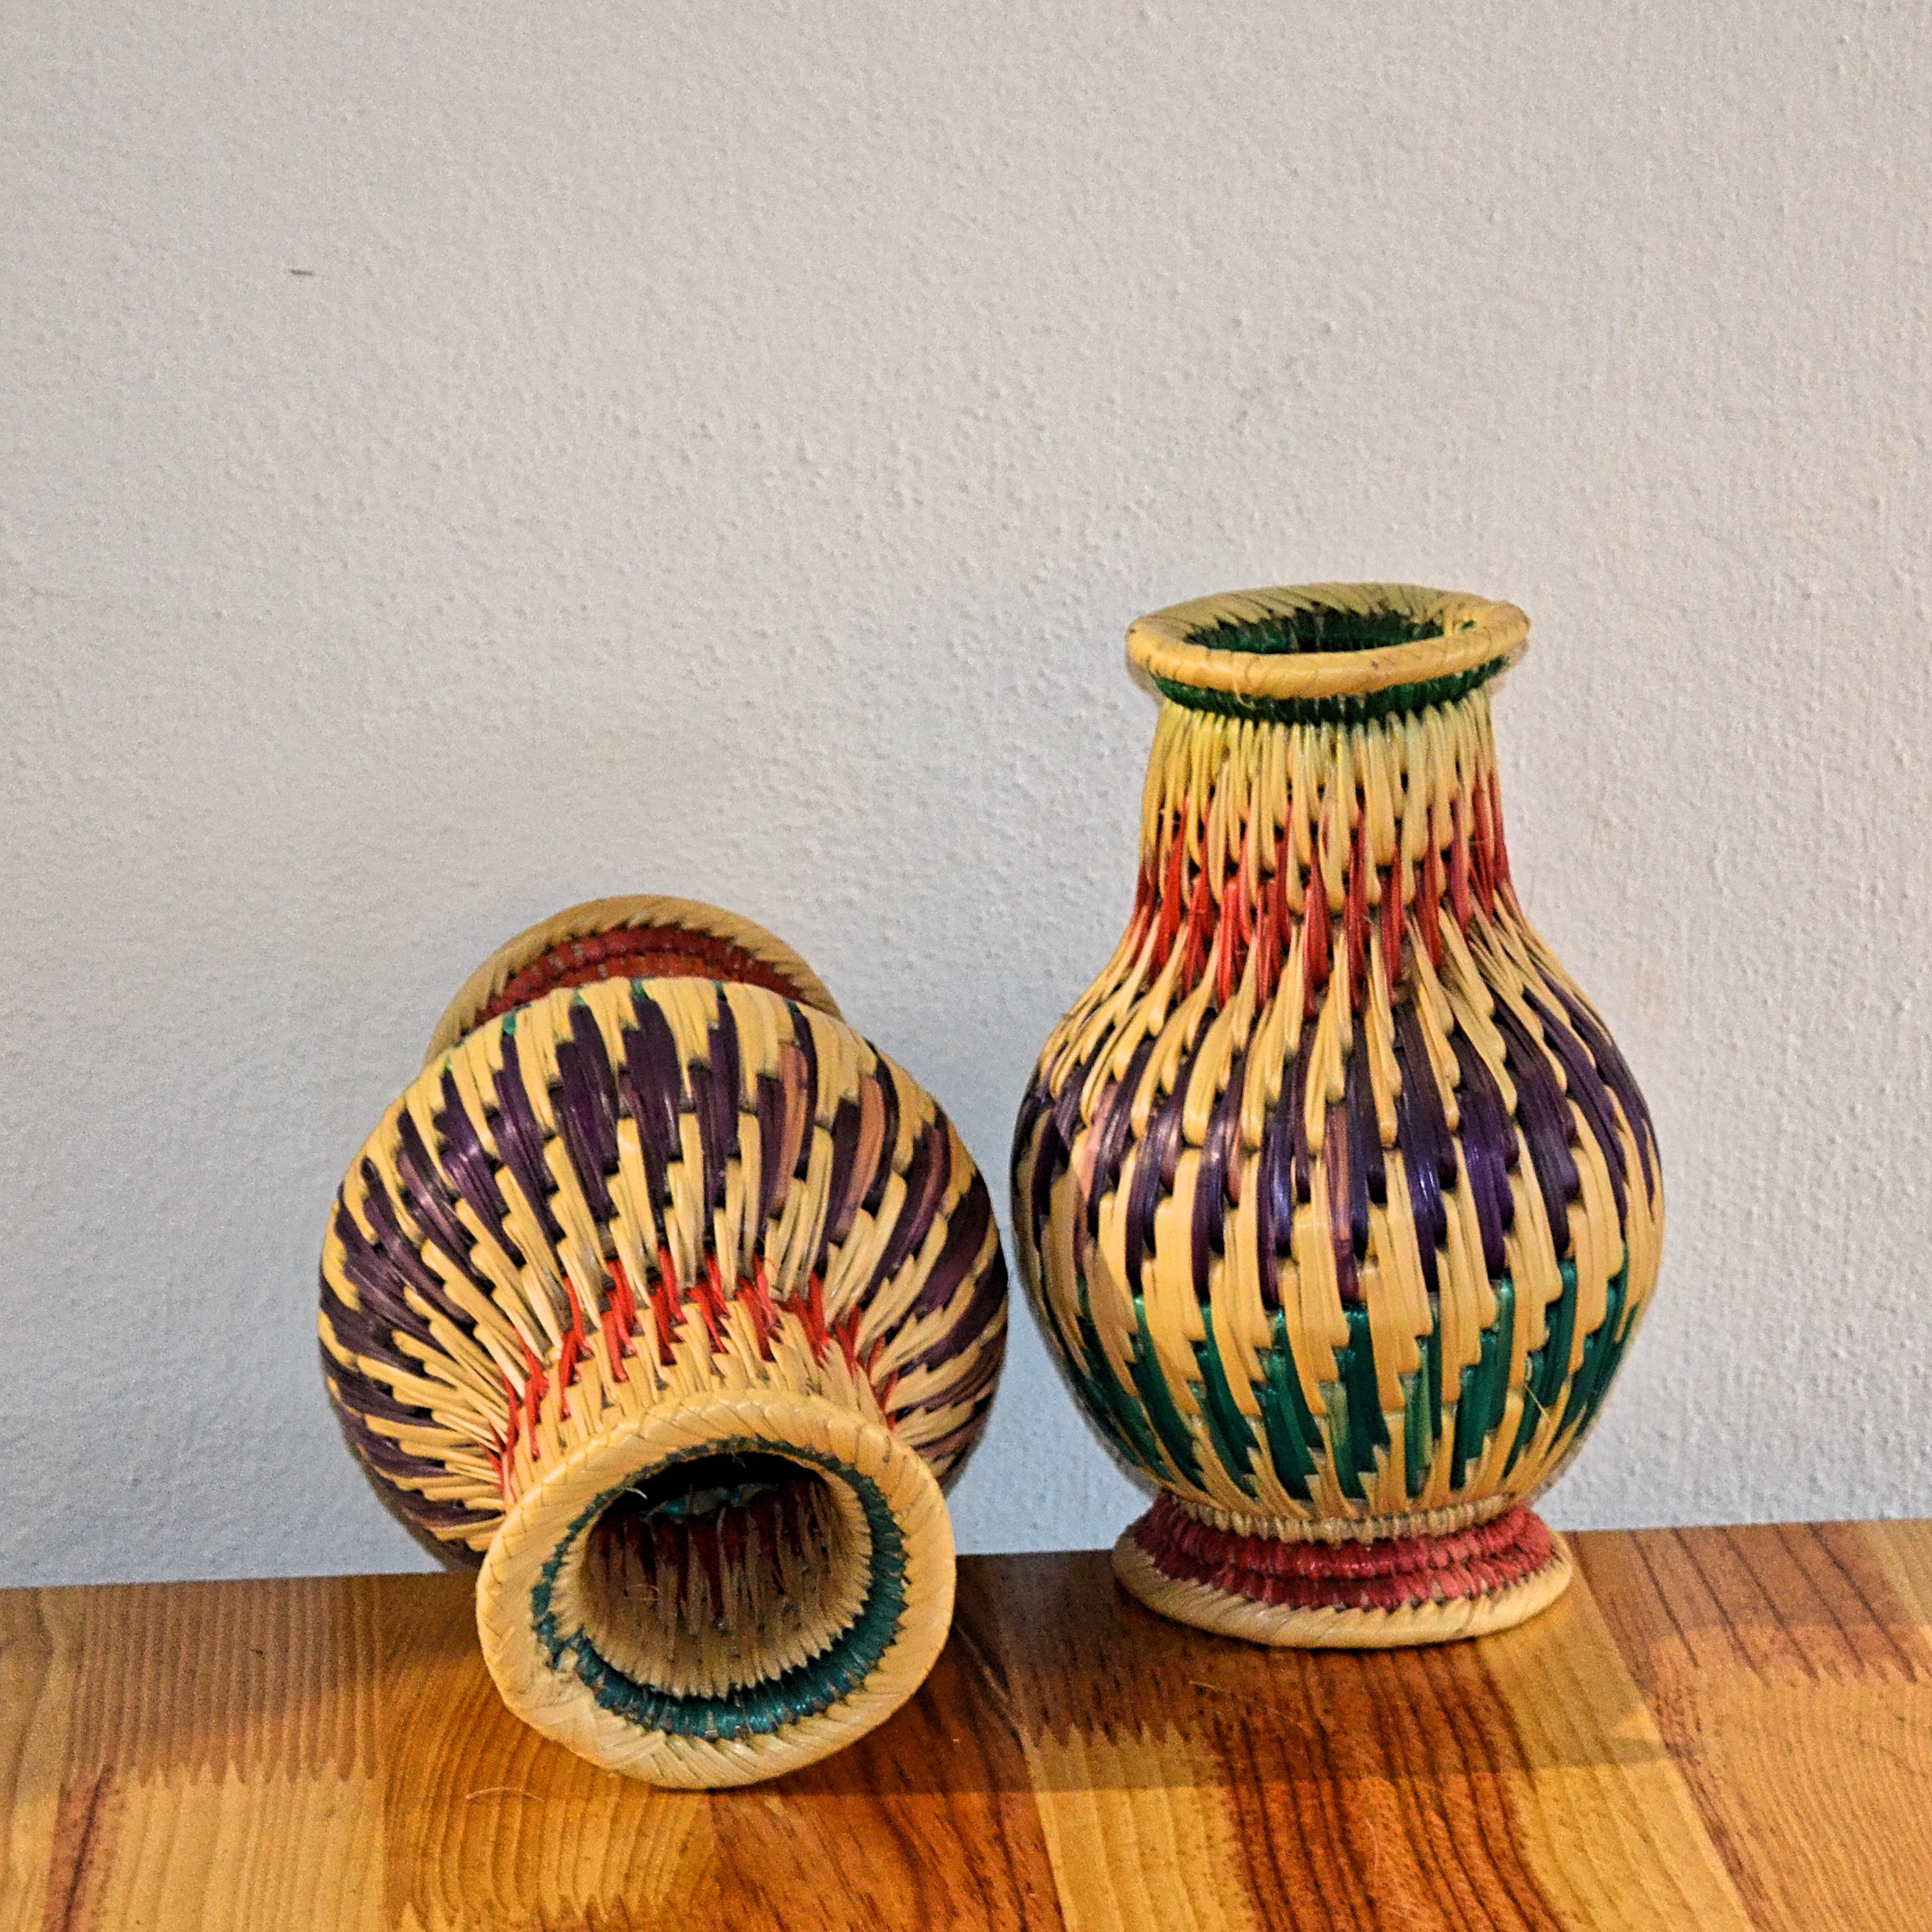 Hand-woven Flower pots in pairs